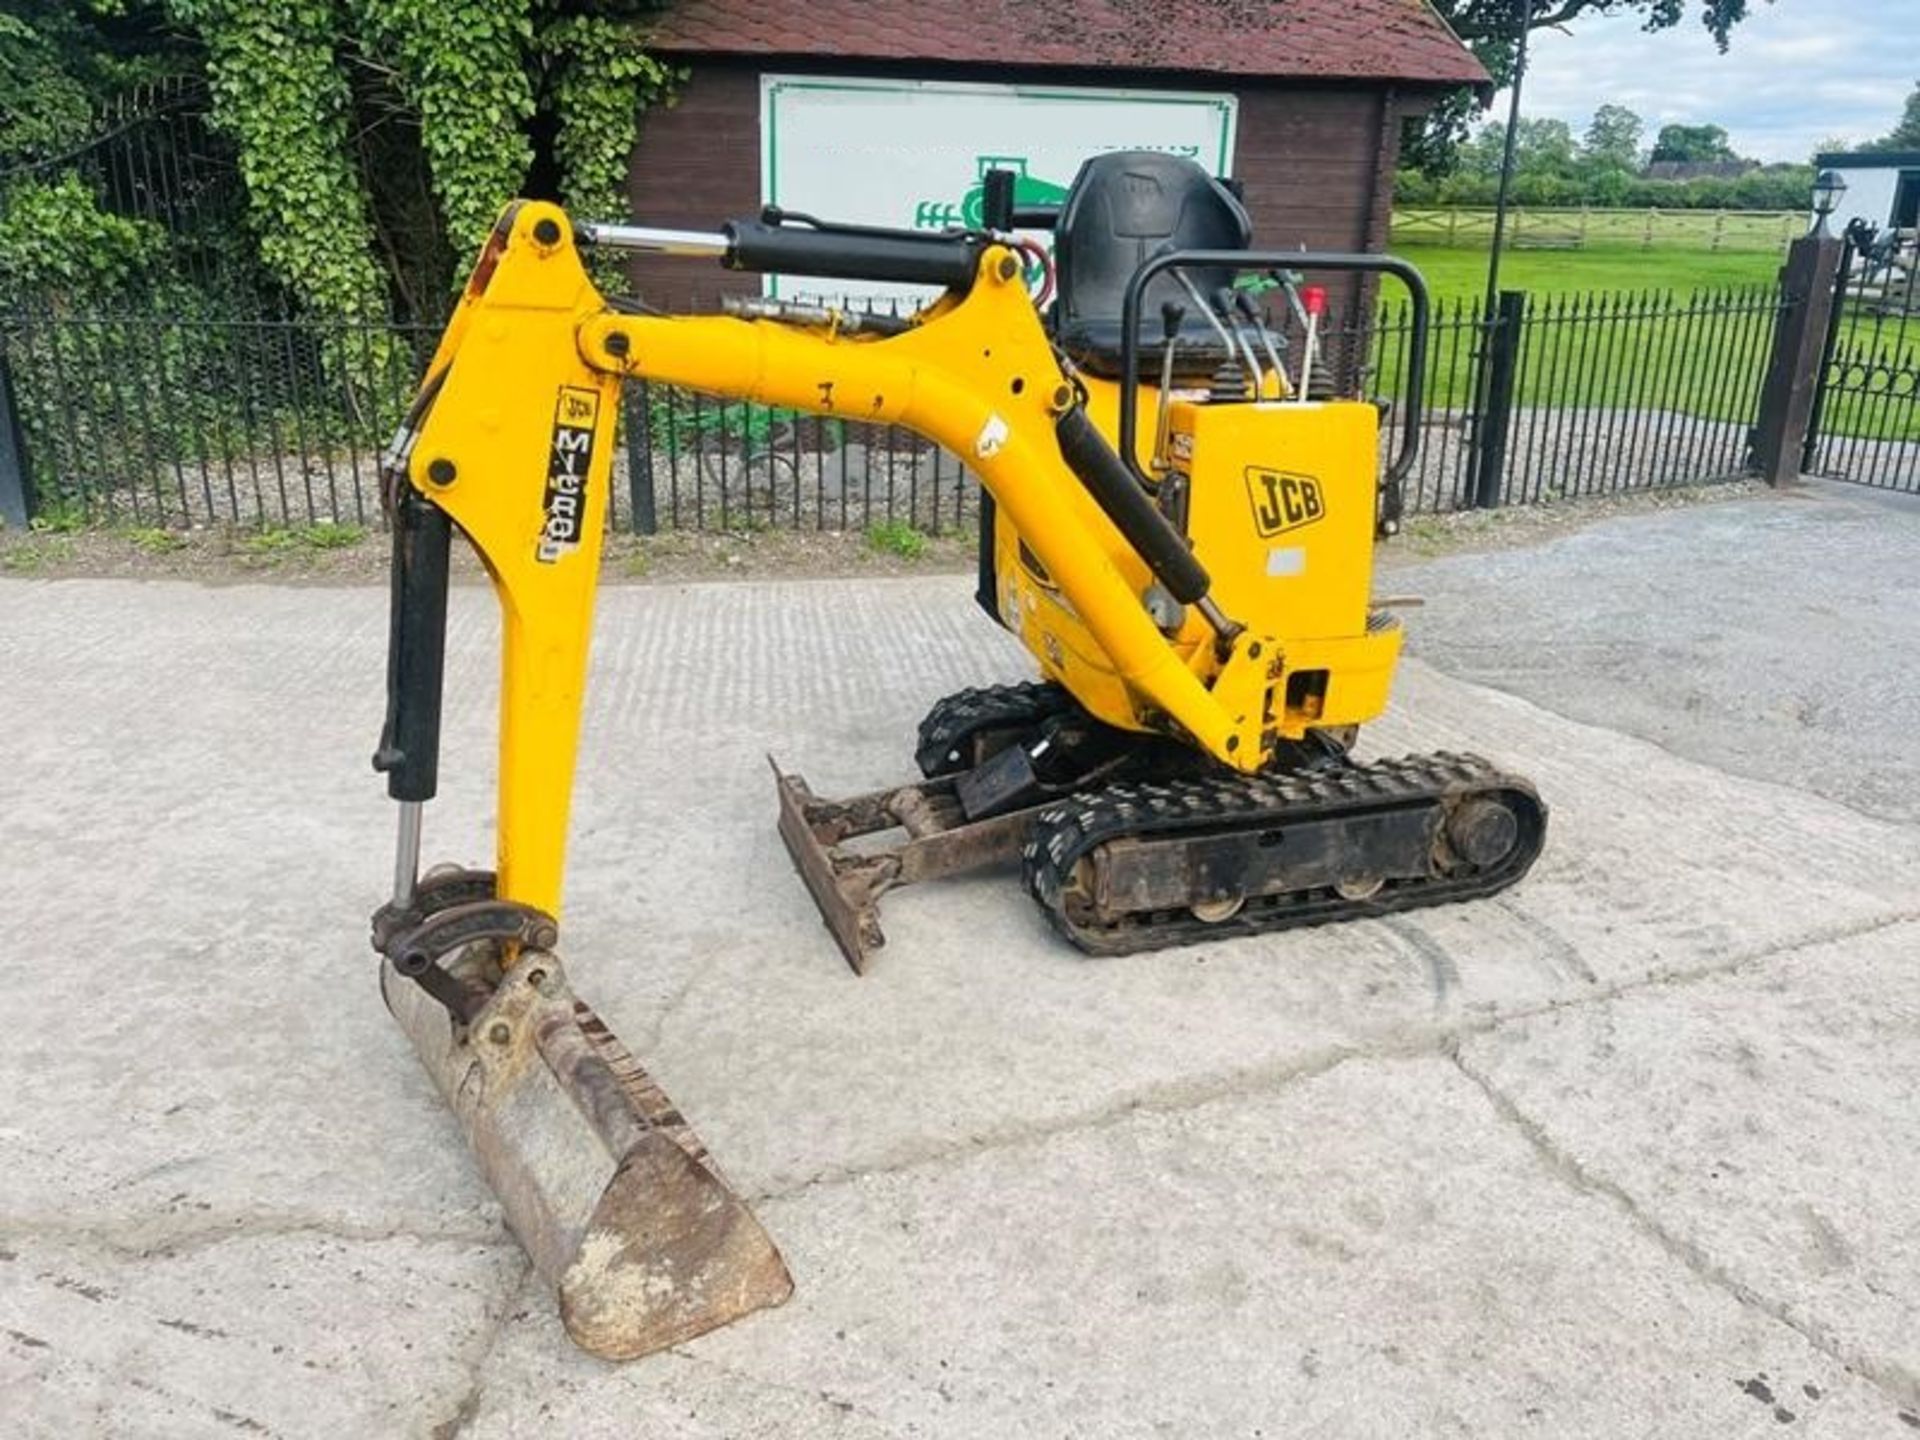 JCB MICRO DIGGER *2753 HOURS* C/W EXPANDING & RUBBER TRACKS - Image 3 of 7